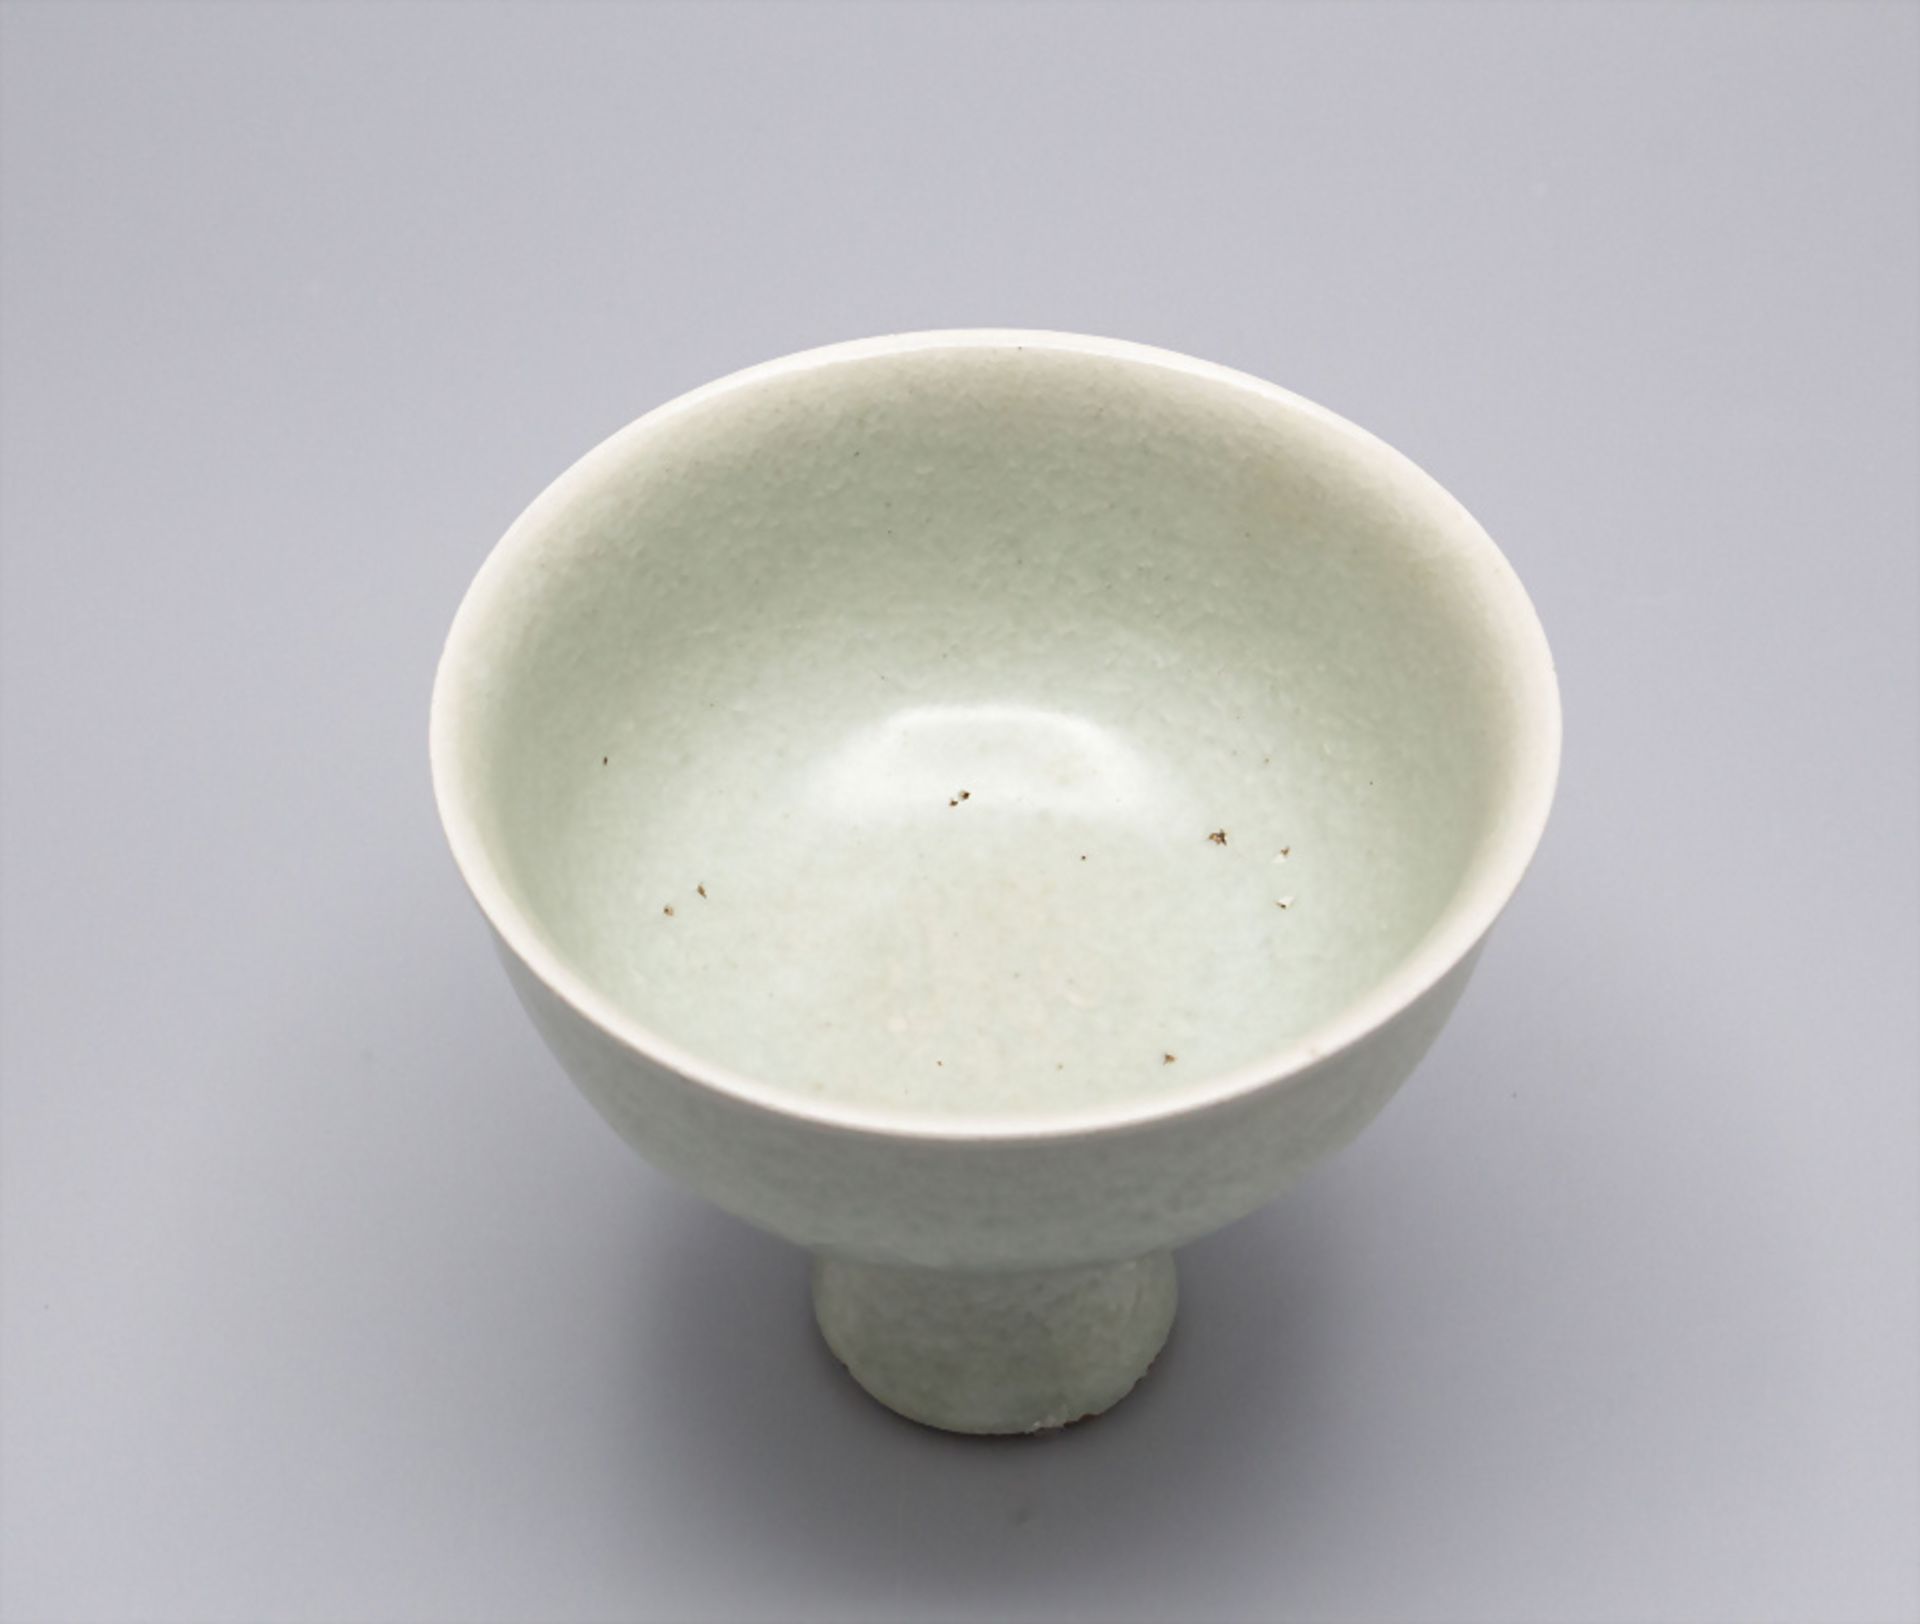 Seladon Fußbecher / A celadon footed cup 'slamp cup', China, Qing-Zeit, 19.-20. Jh. - Image 3 of 4